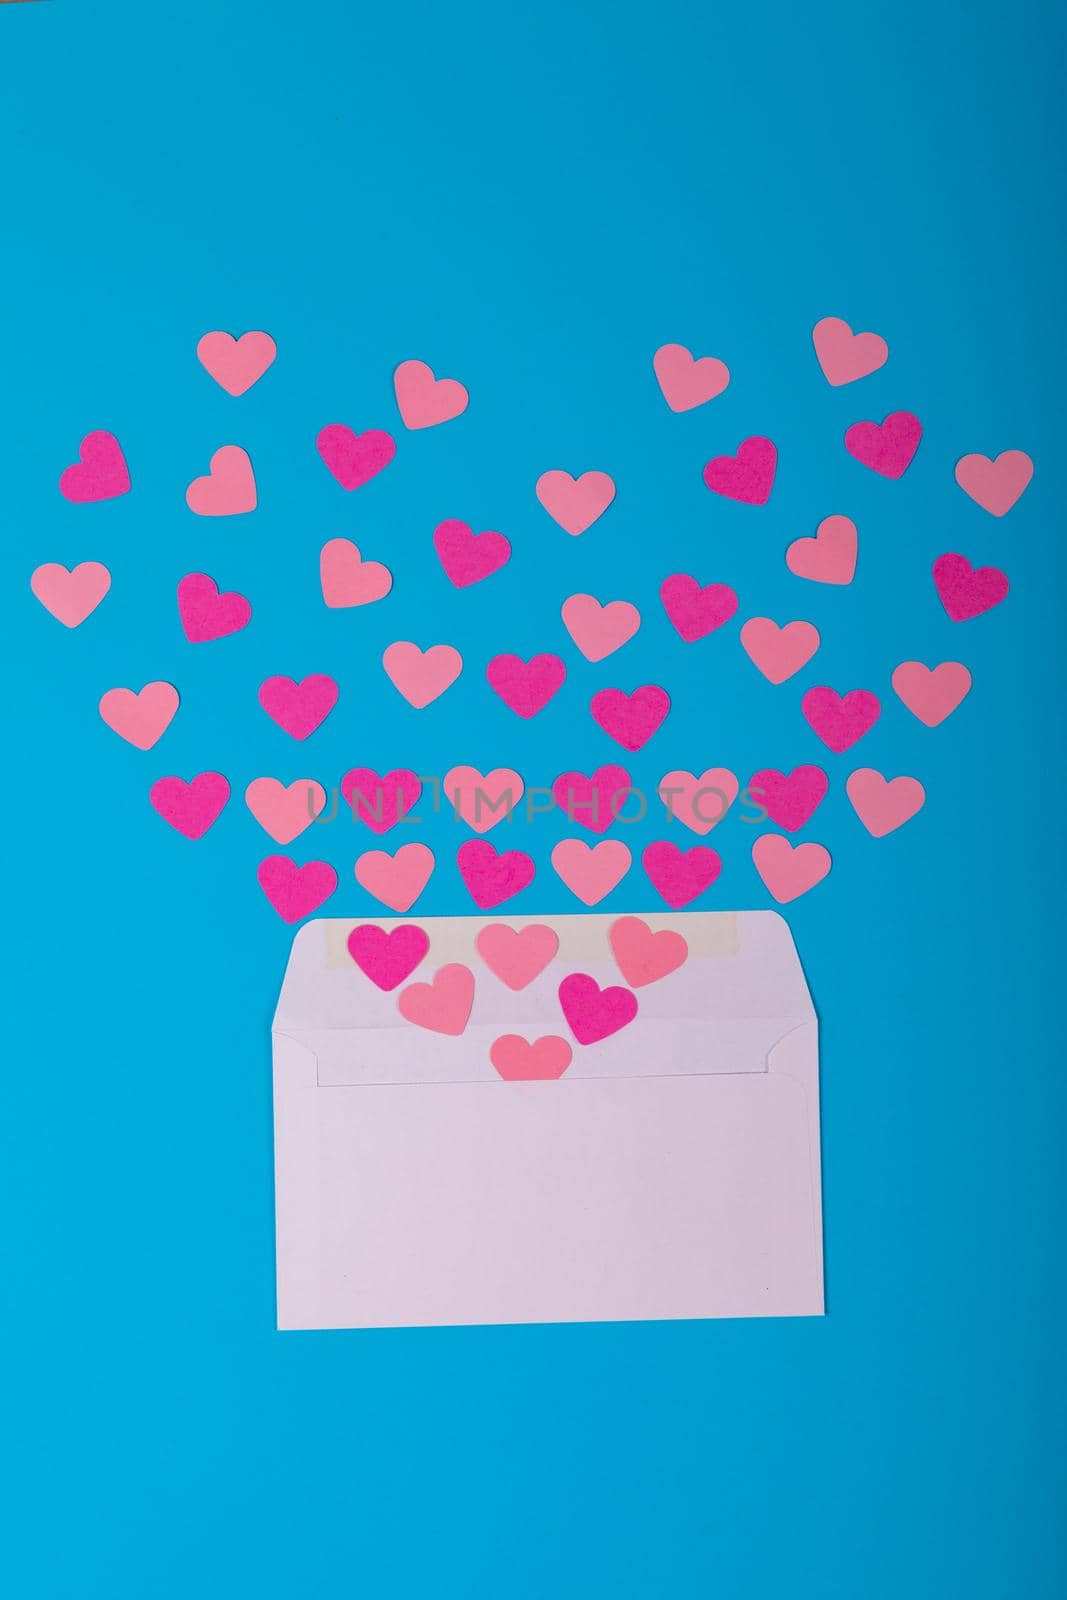 Open white envelope with scattered peach and pink colored heart shapes on blue background by Wavebreakmedia